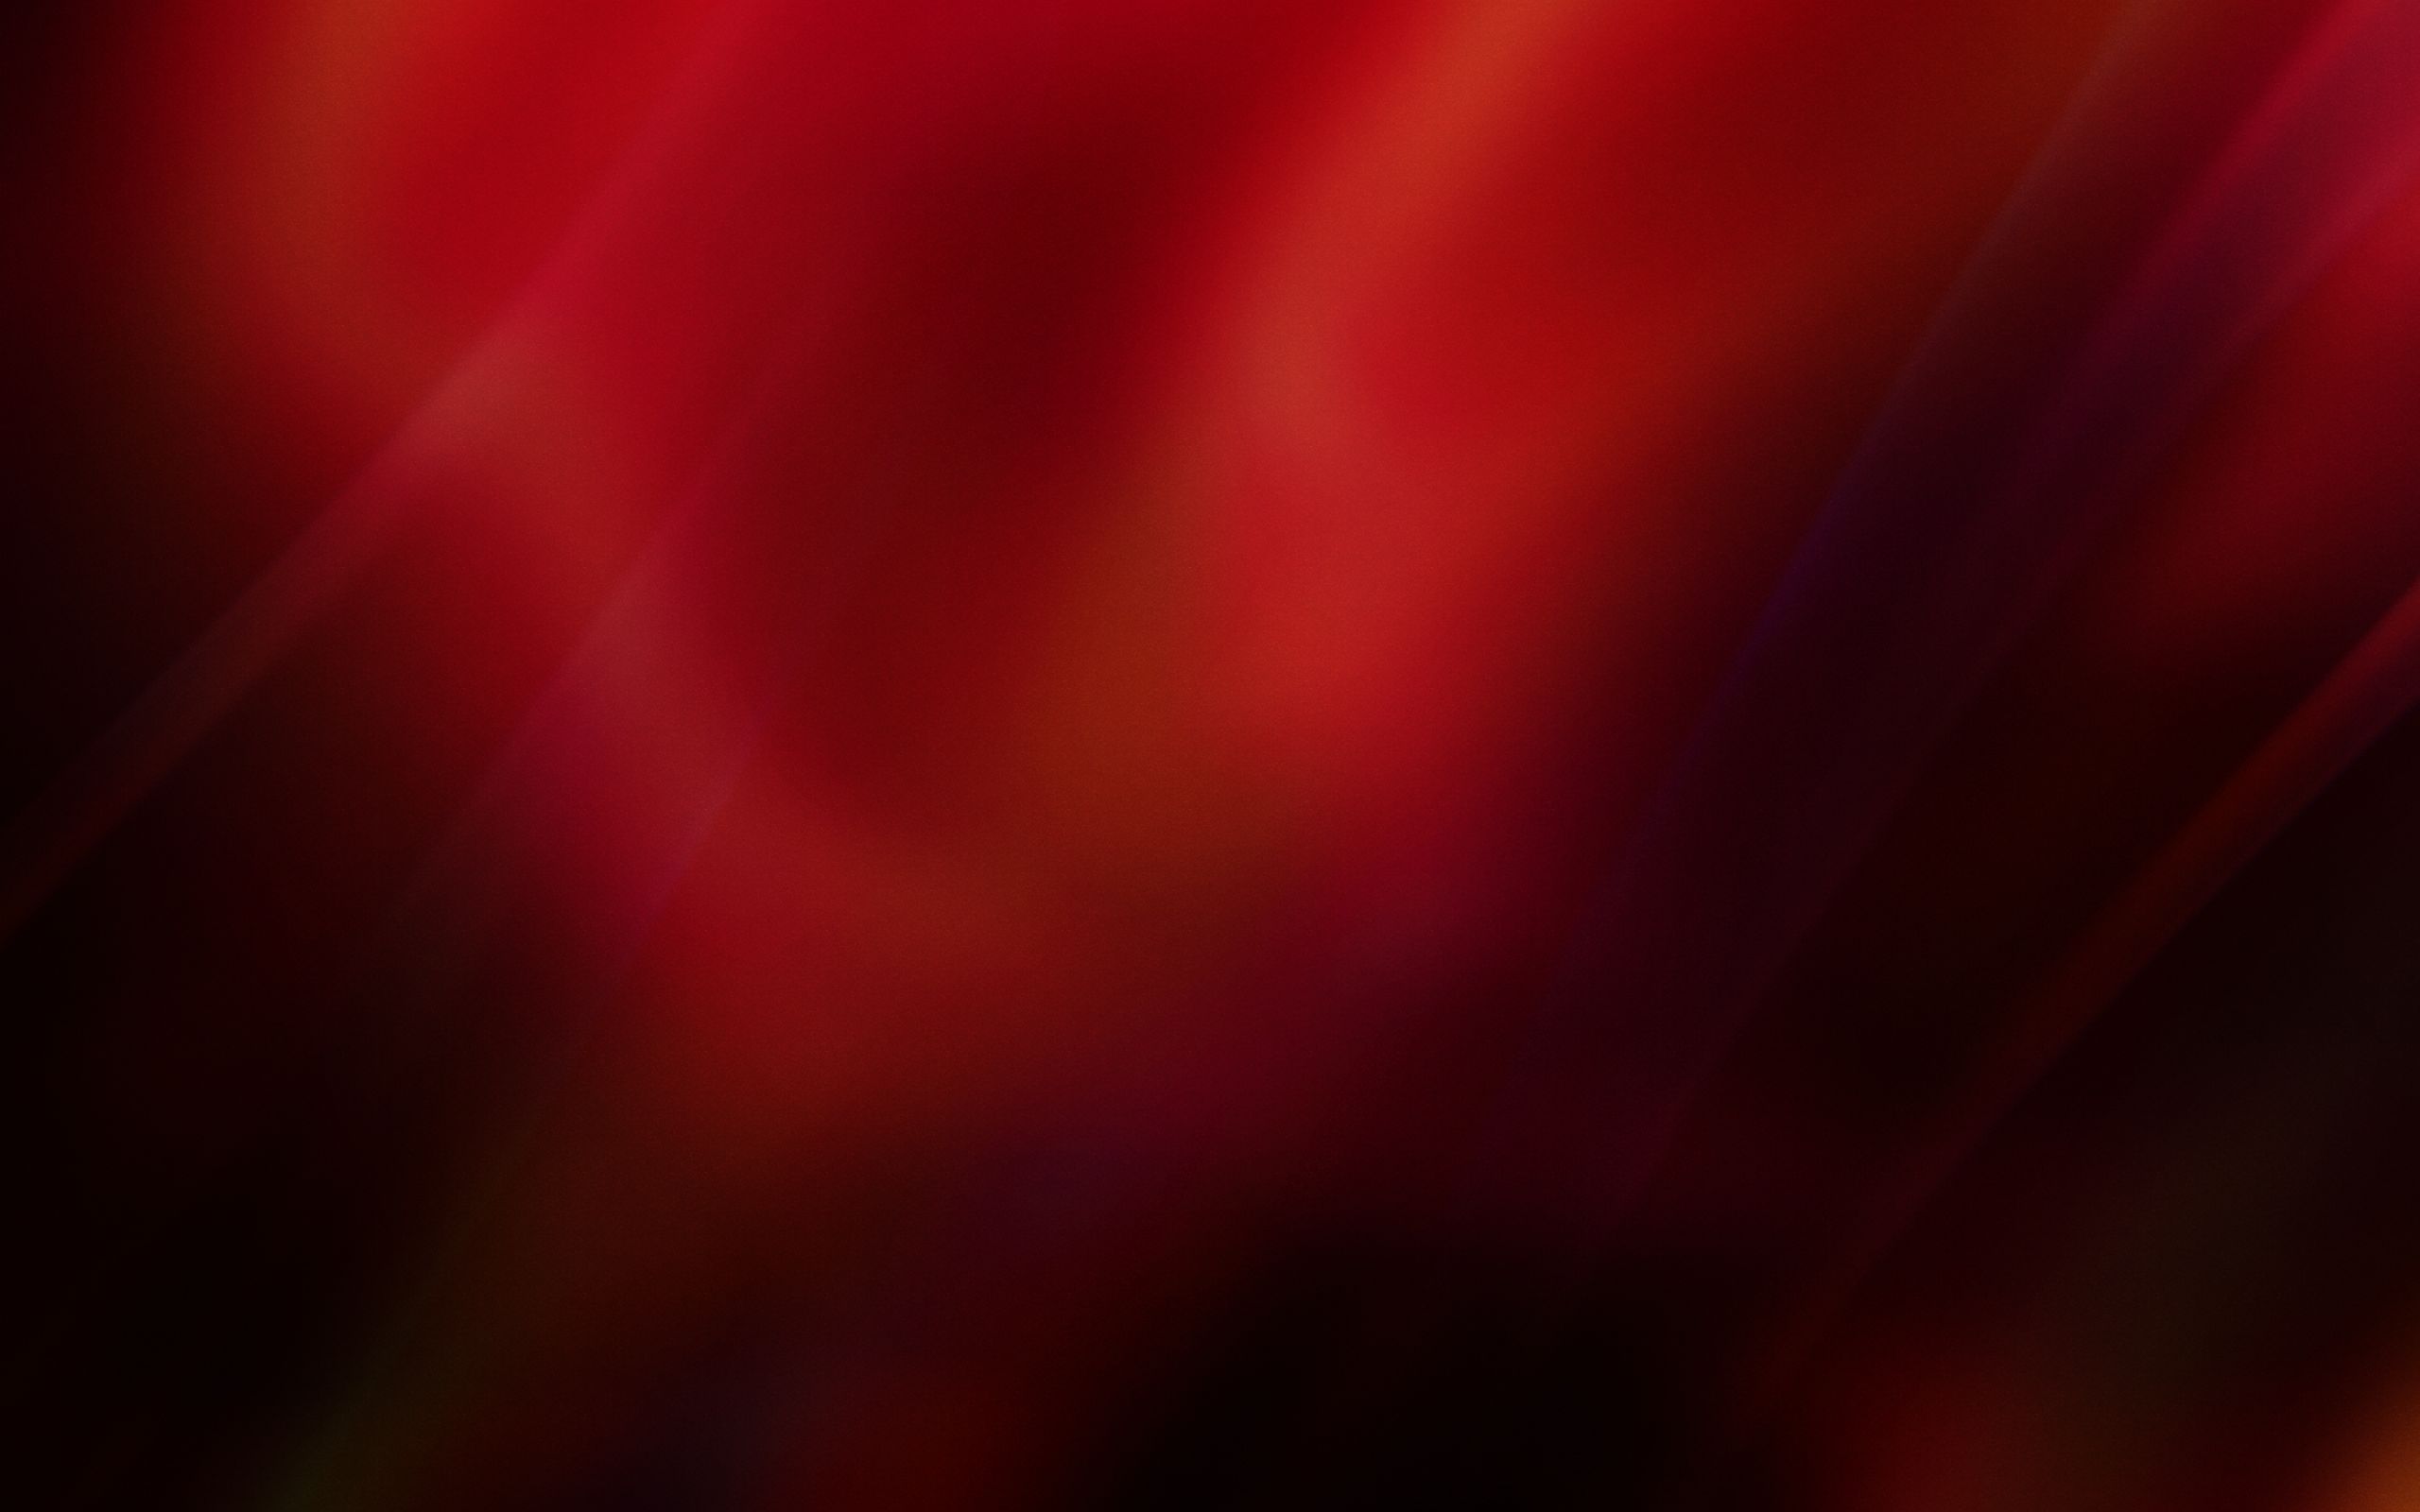 Black and Red Abstract Cool Backgrounds Wallpaper 461 - Amazing